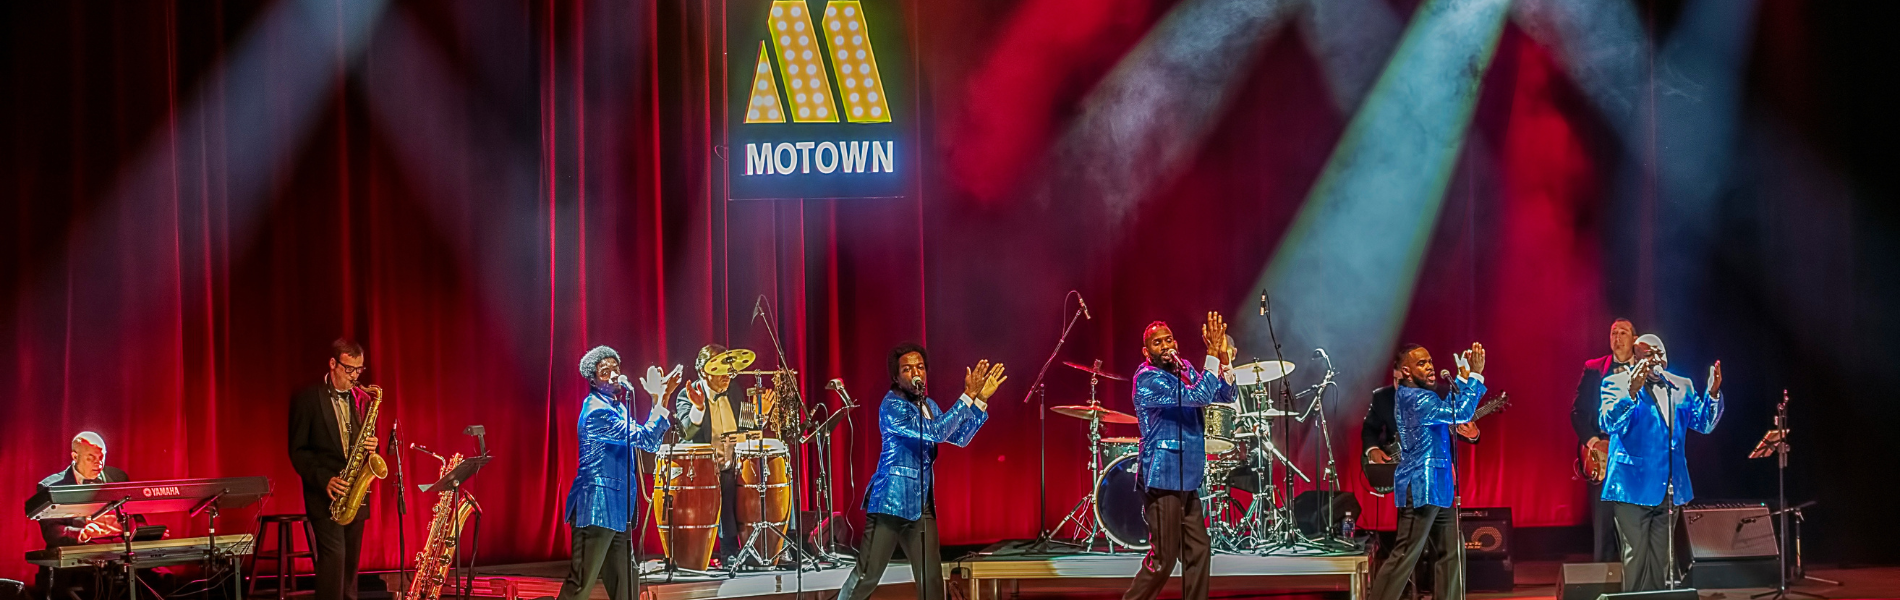 5 men in blue suit coats dancing in sync with musicians behind them and a sign that says Motown.